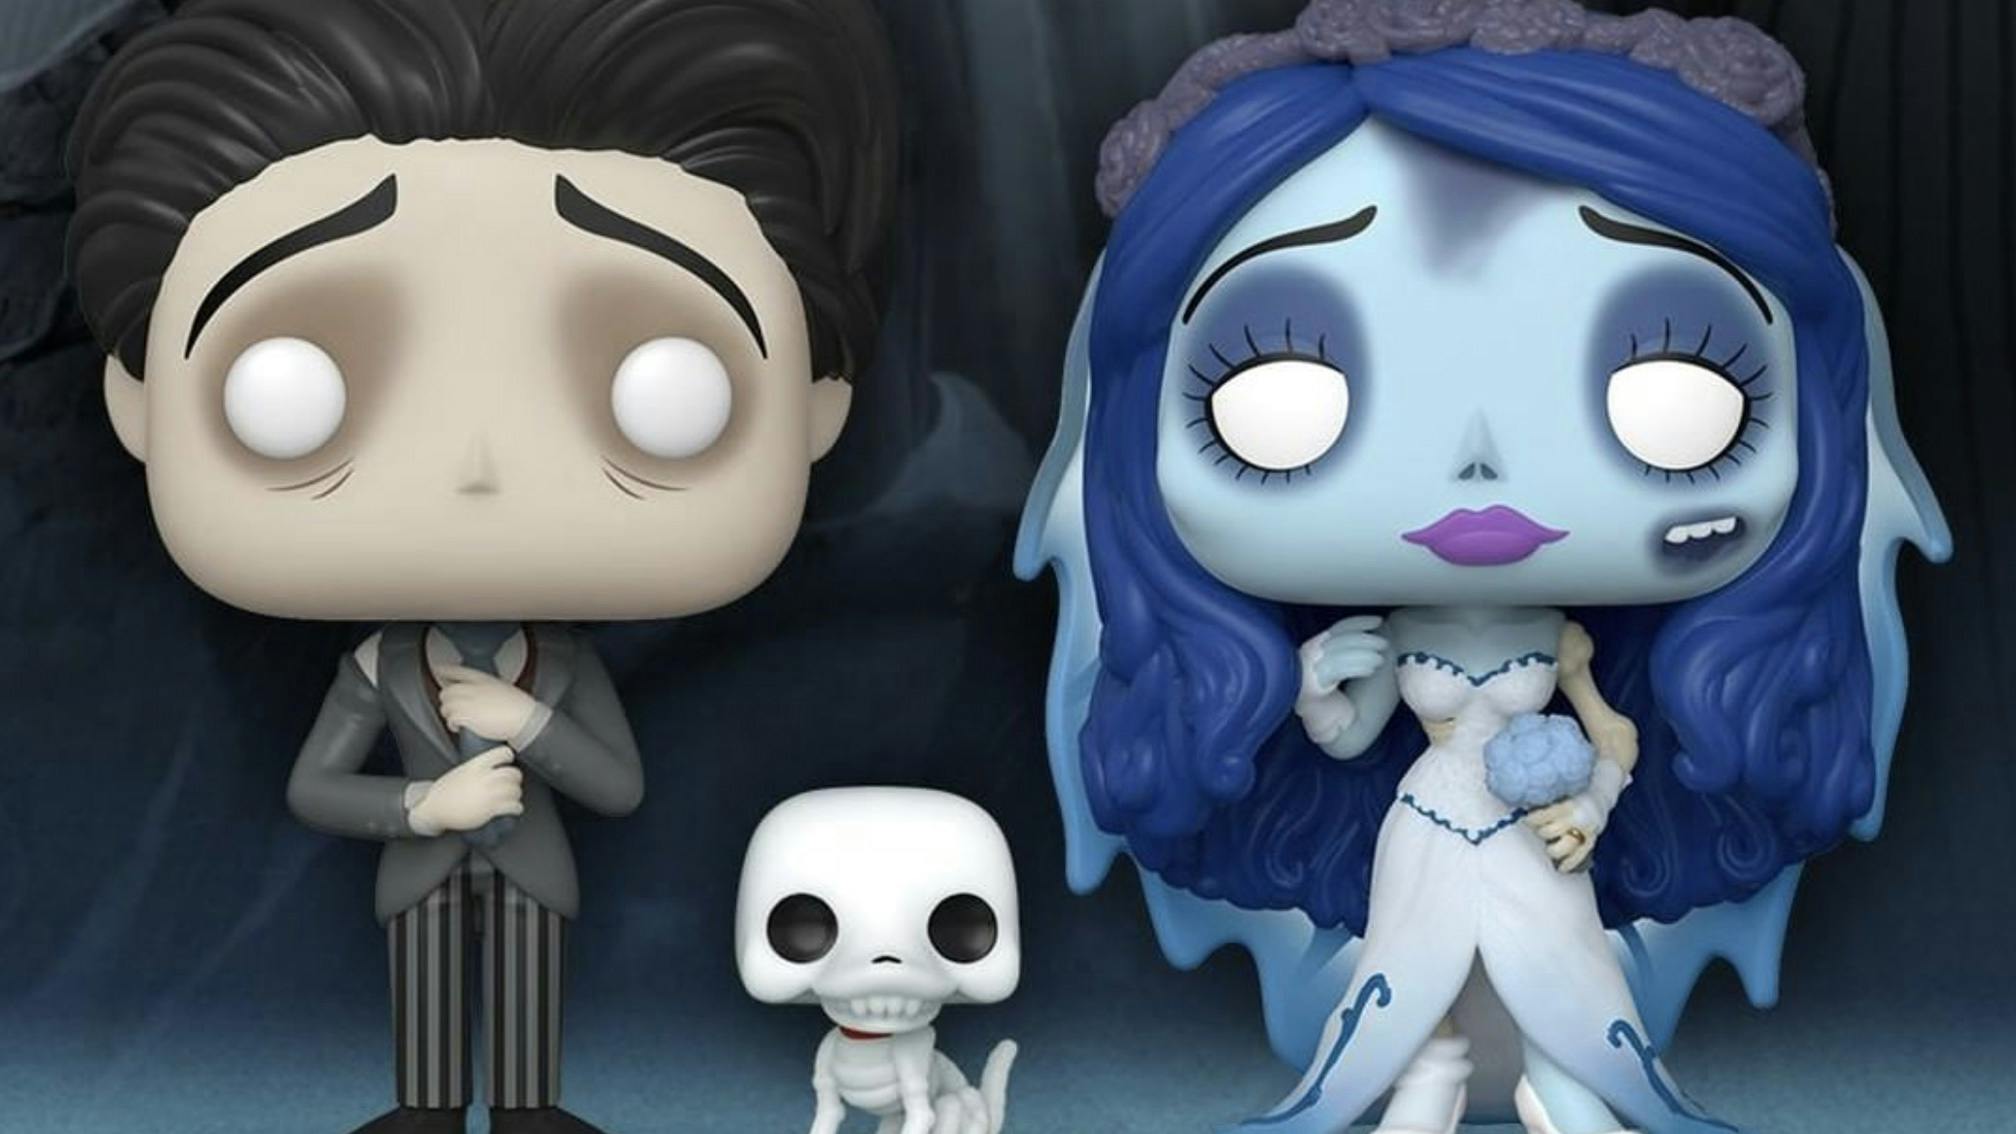 Funko Launch Early Halloween Range With Corpse Bride, Edward Scissorhands And More